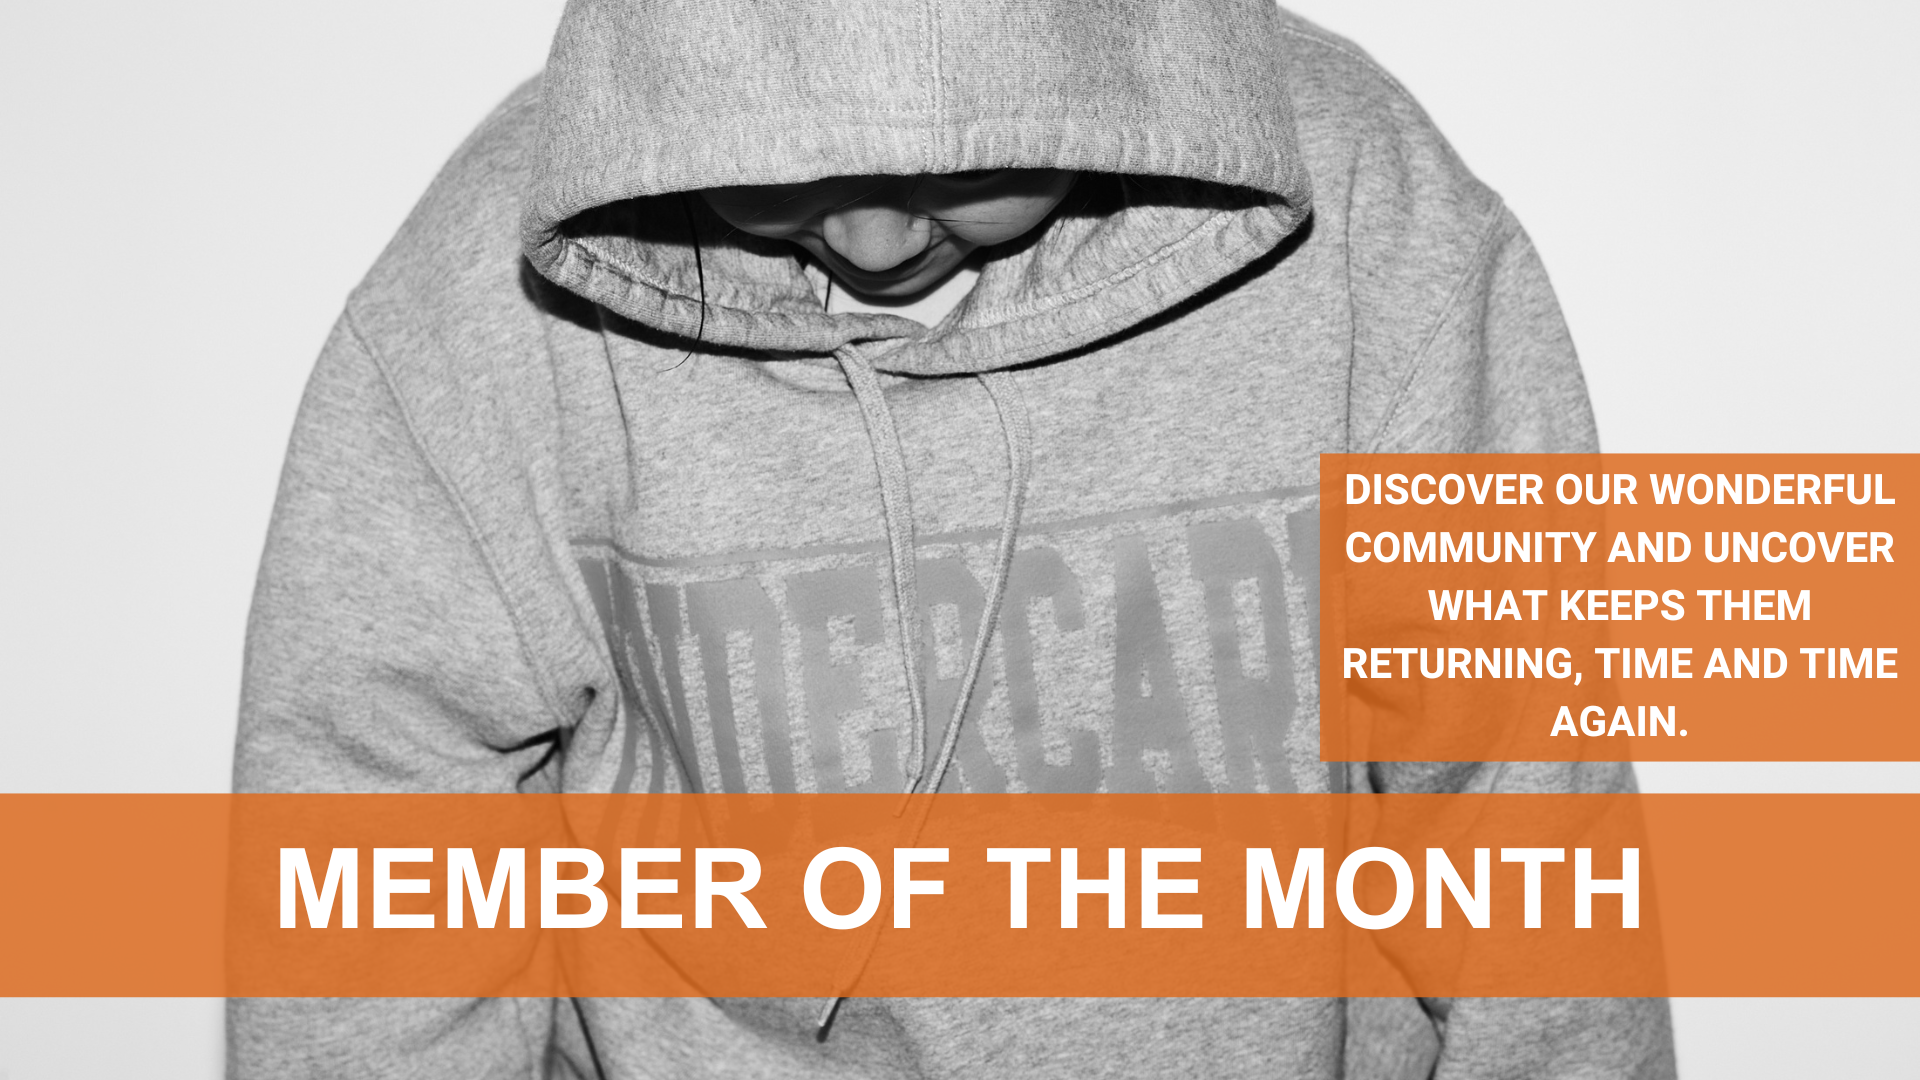 MEMBER OF THE MONTH